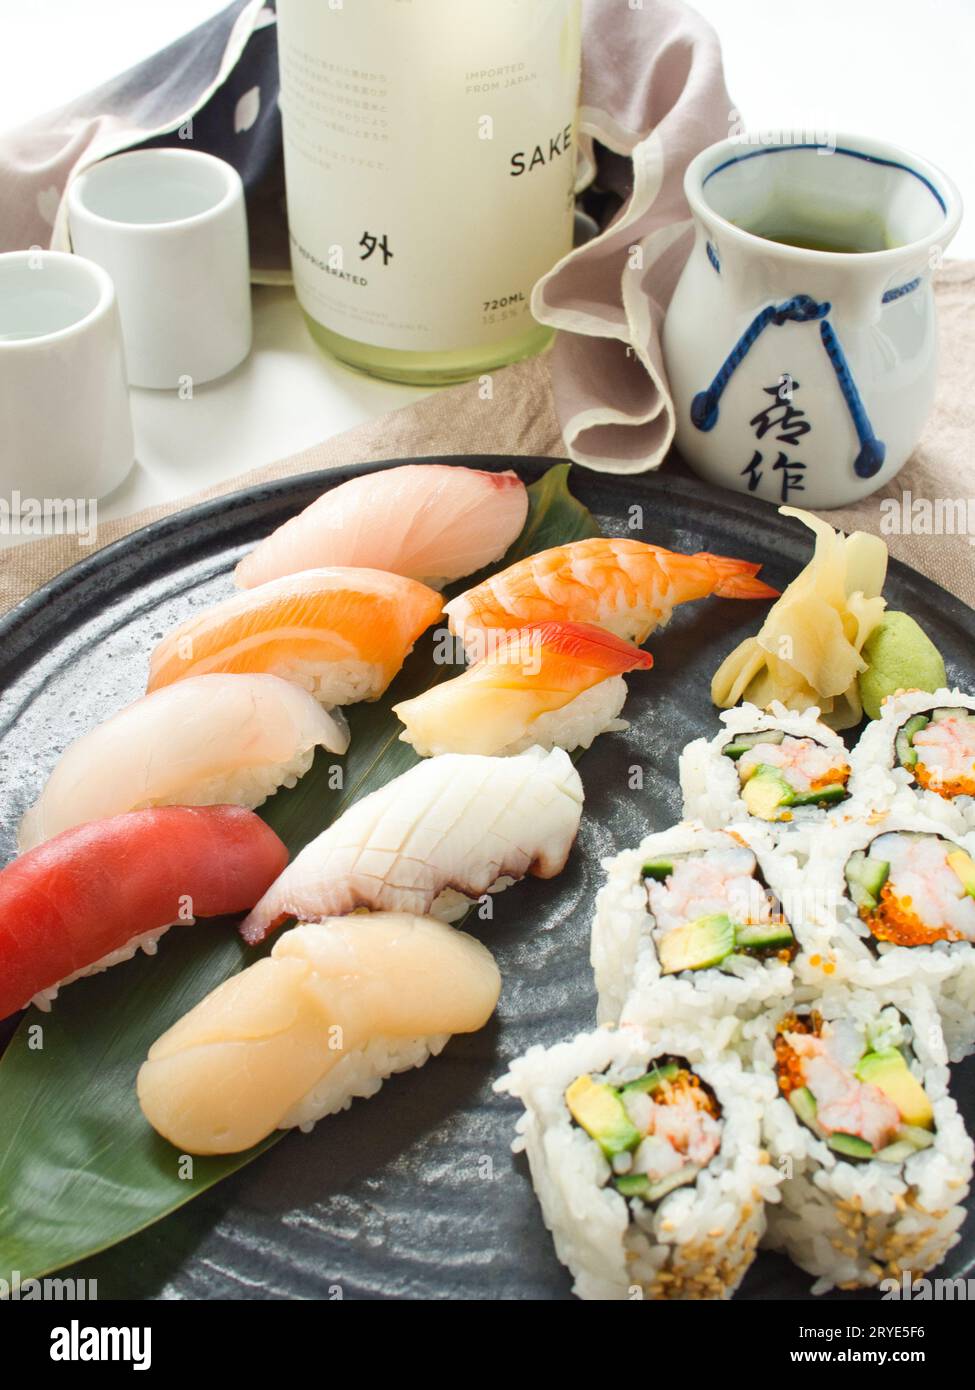 Colorful assorted nigiri sushi on plate with california roll, served with sake, at Japanese restaurant. Stock Photo